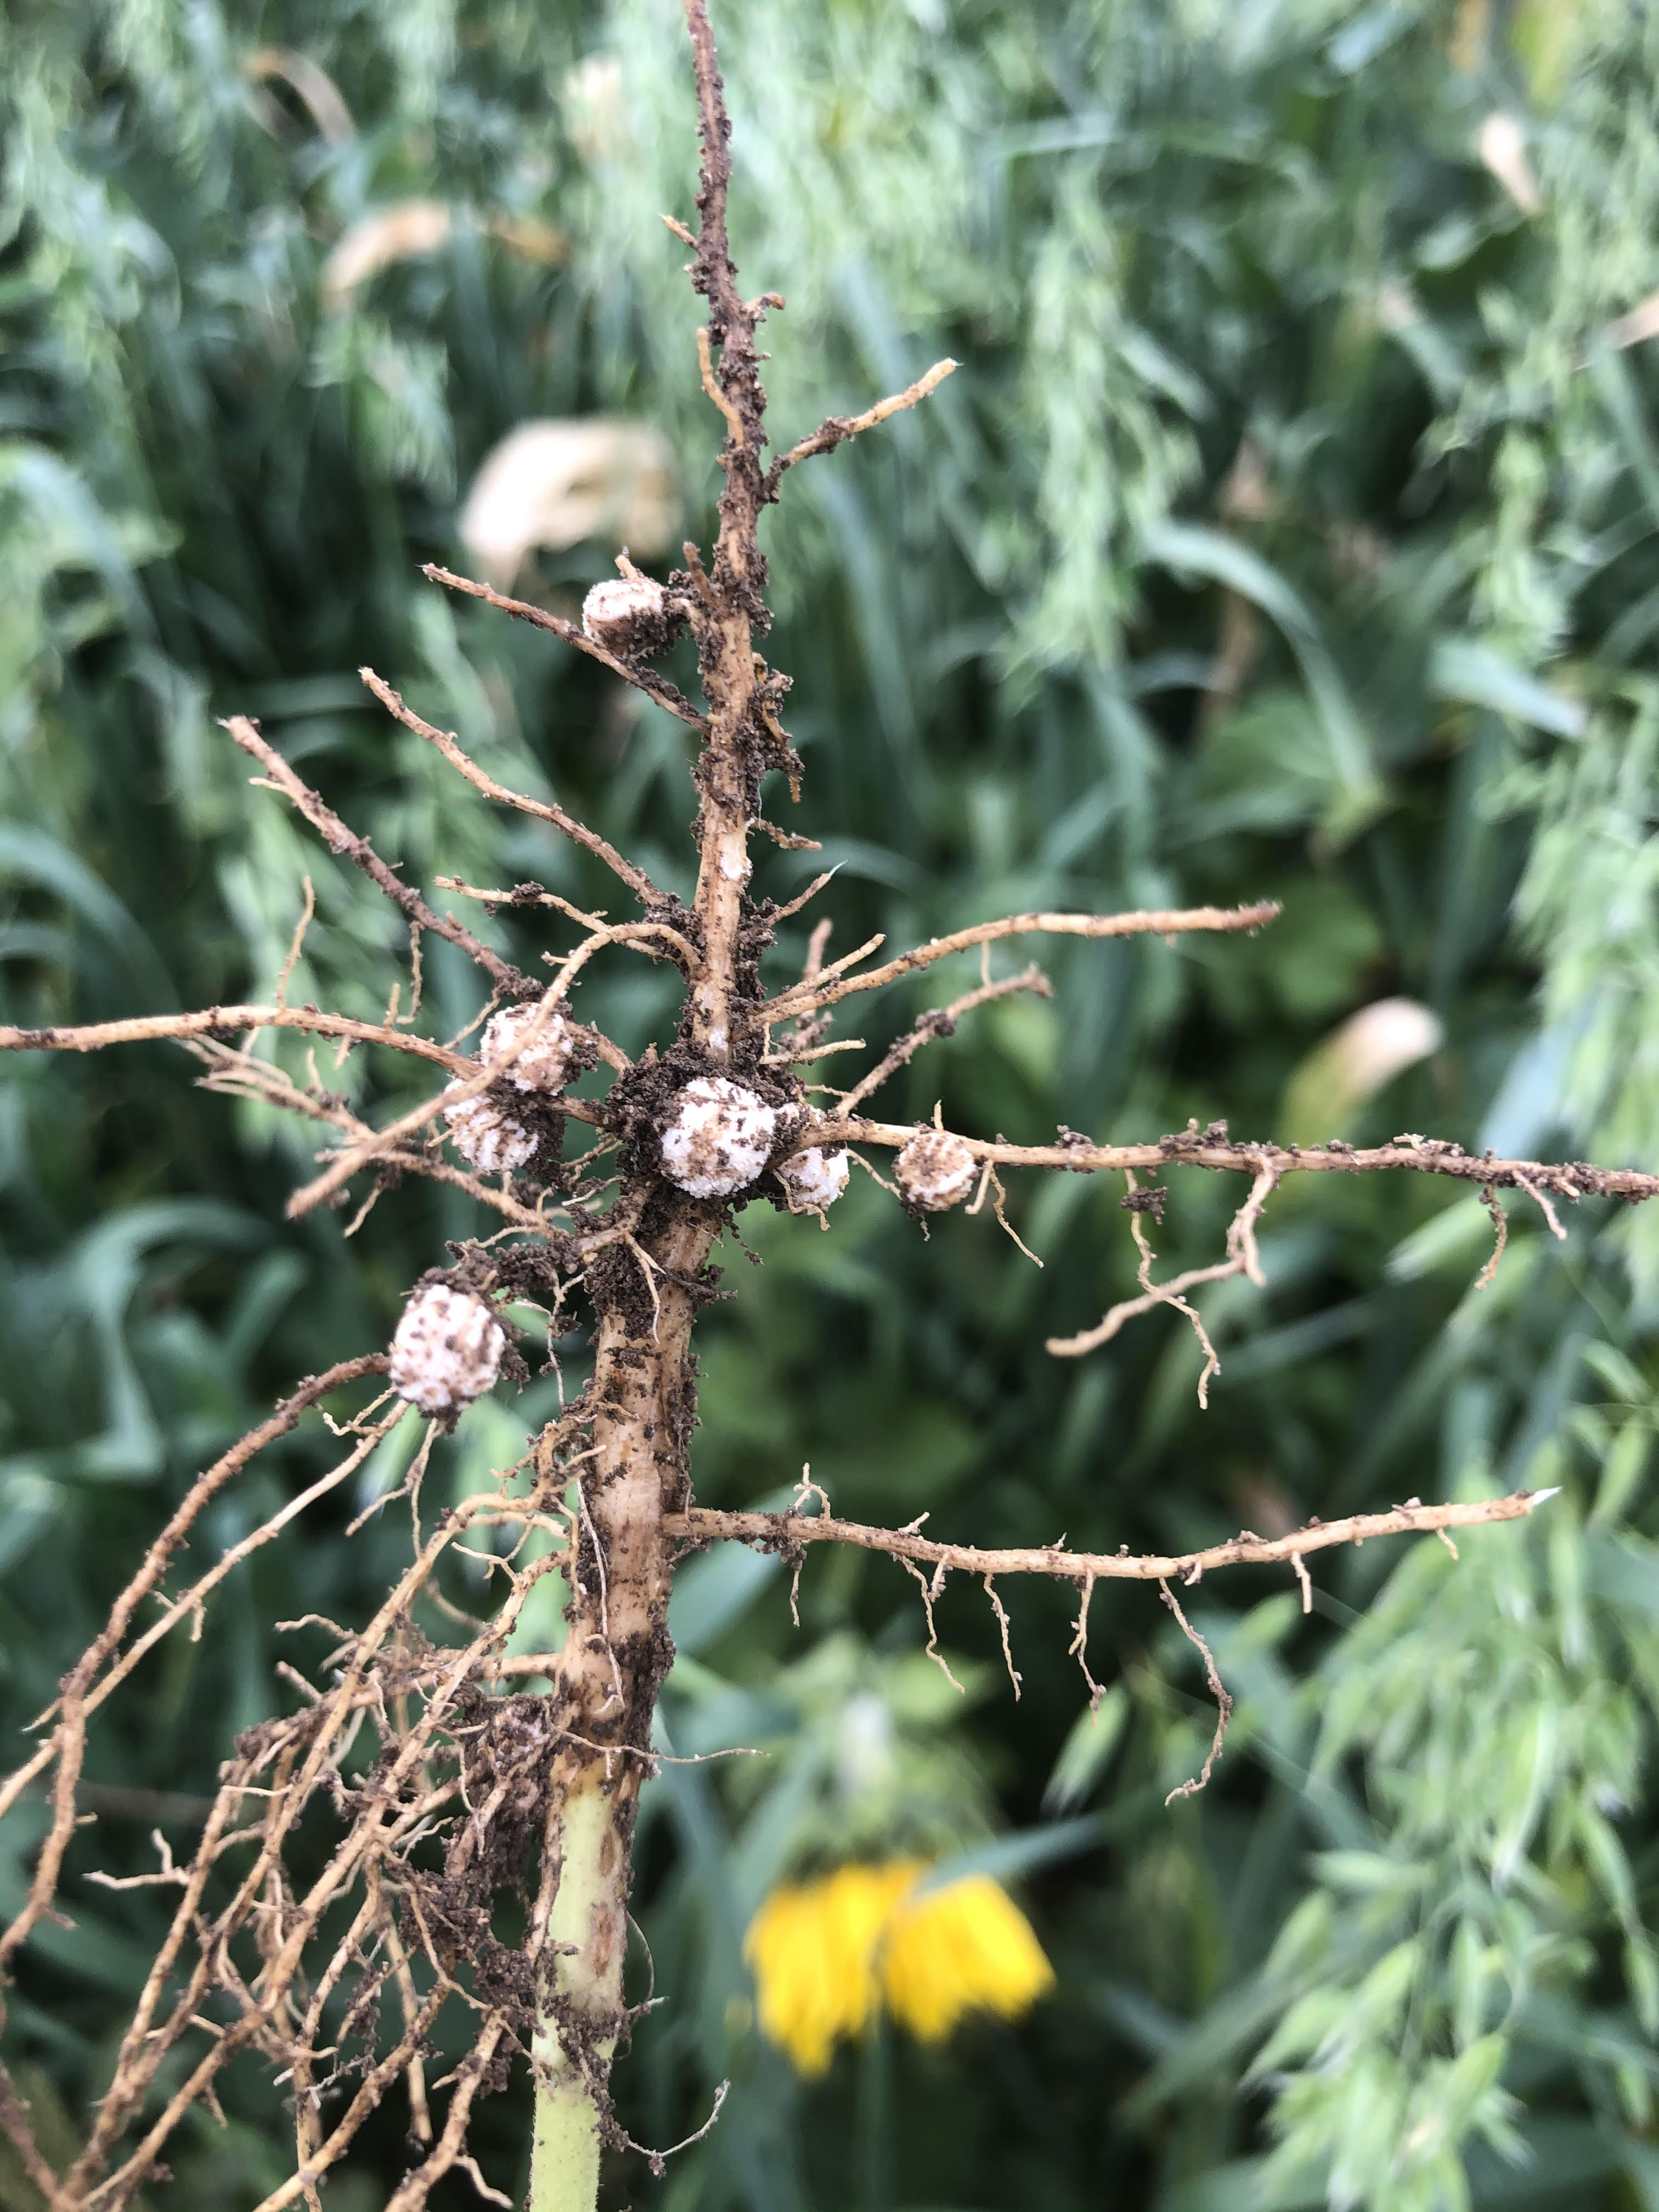 FAQ – How much nitrogen will this cover crop produce?